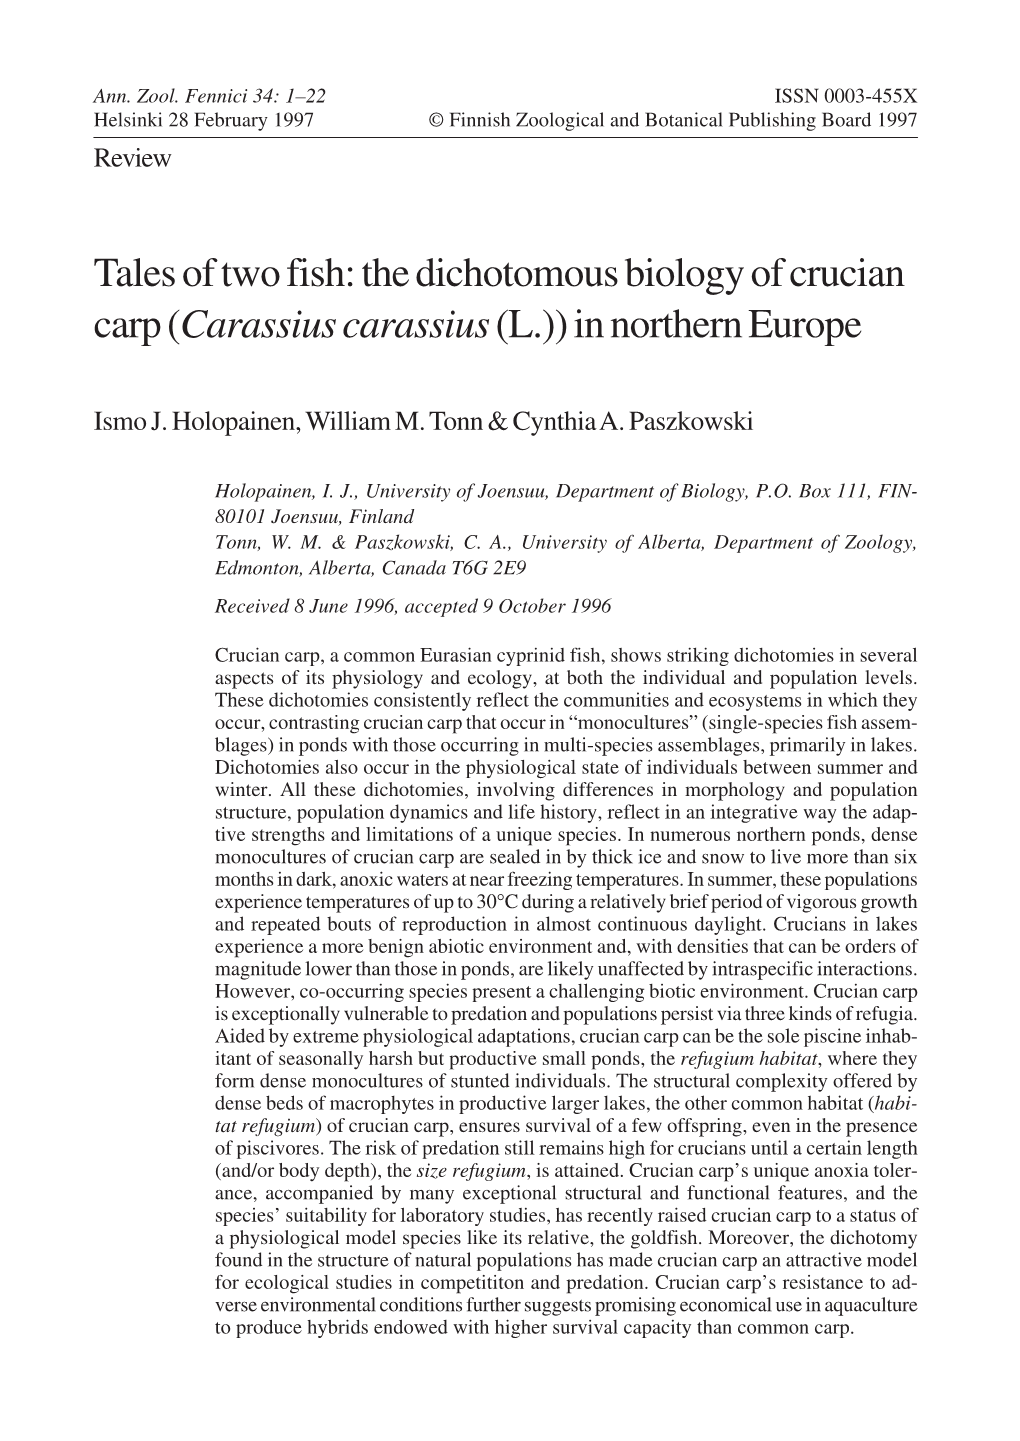 Tales of Two Fish: the Dichotomous Biology of Crucian Carp (Carassius Carassius (L.)) in Northern Europe